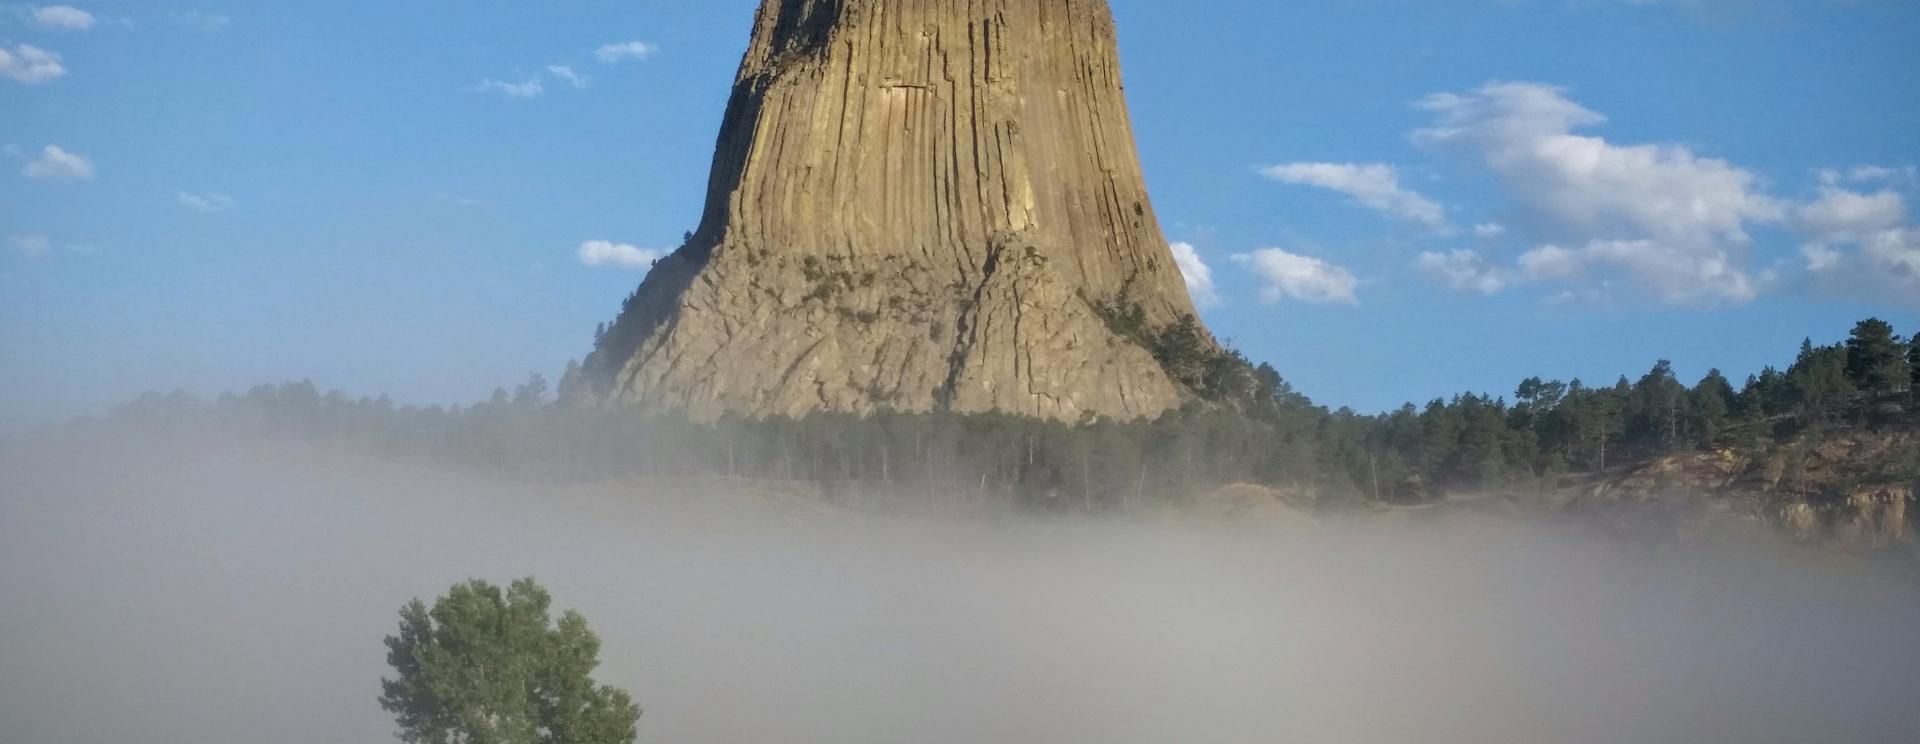 Devils Tower Trading Post & Ice Cream Parlor